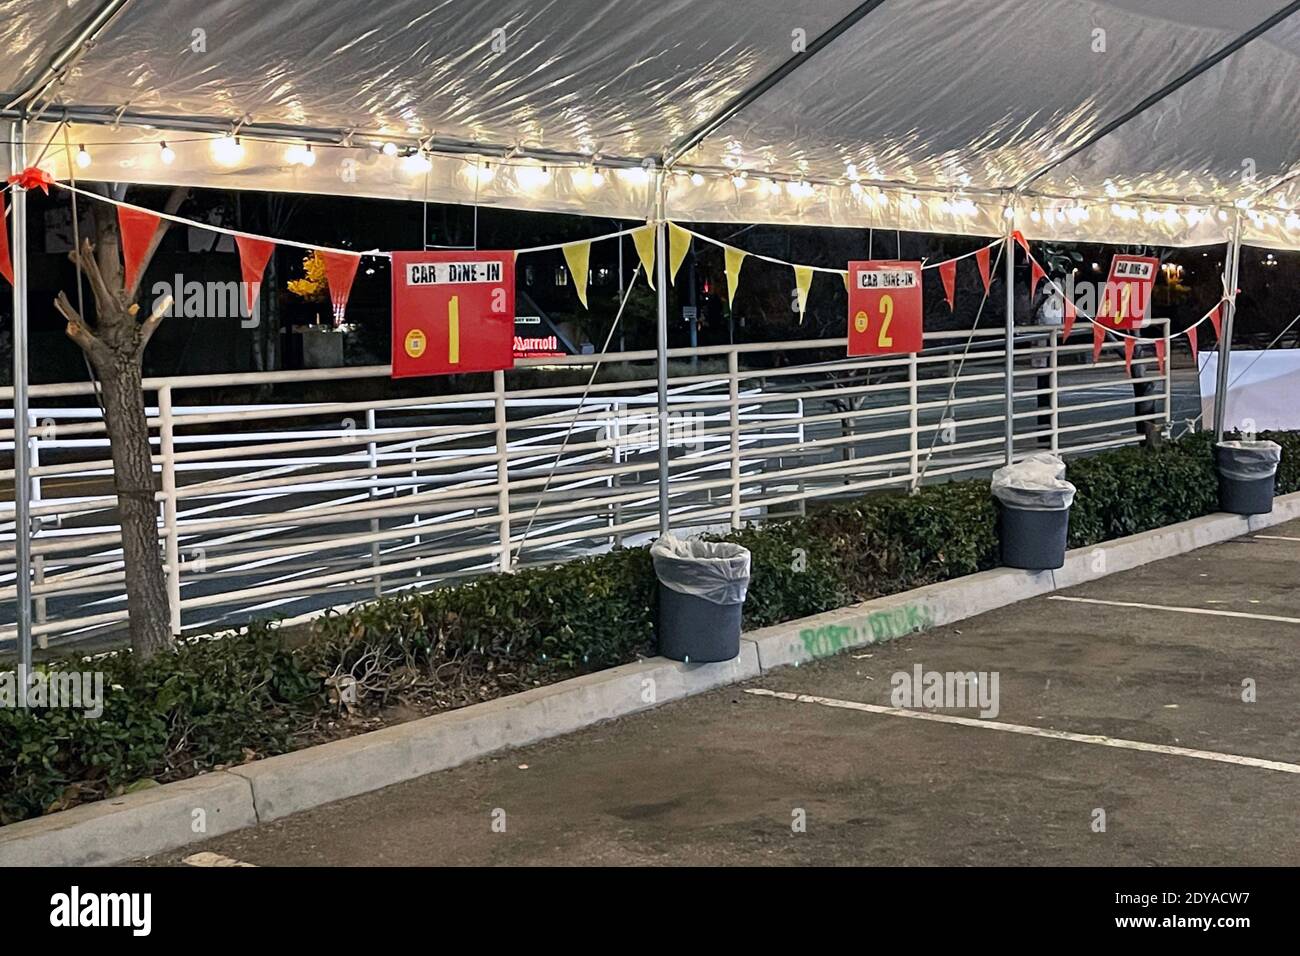 An outdoor dining area at Denny's Restaurant converted into a car dine-in area amid the global coronavirus COVID019 pandemic, Sunday, Dec. 18, 2020, i Stock Photo